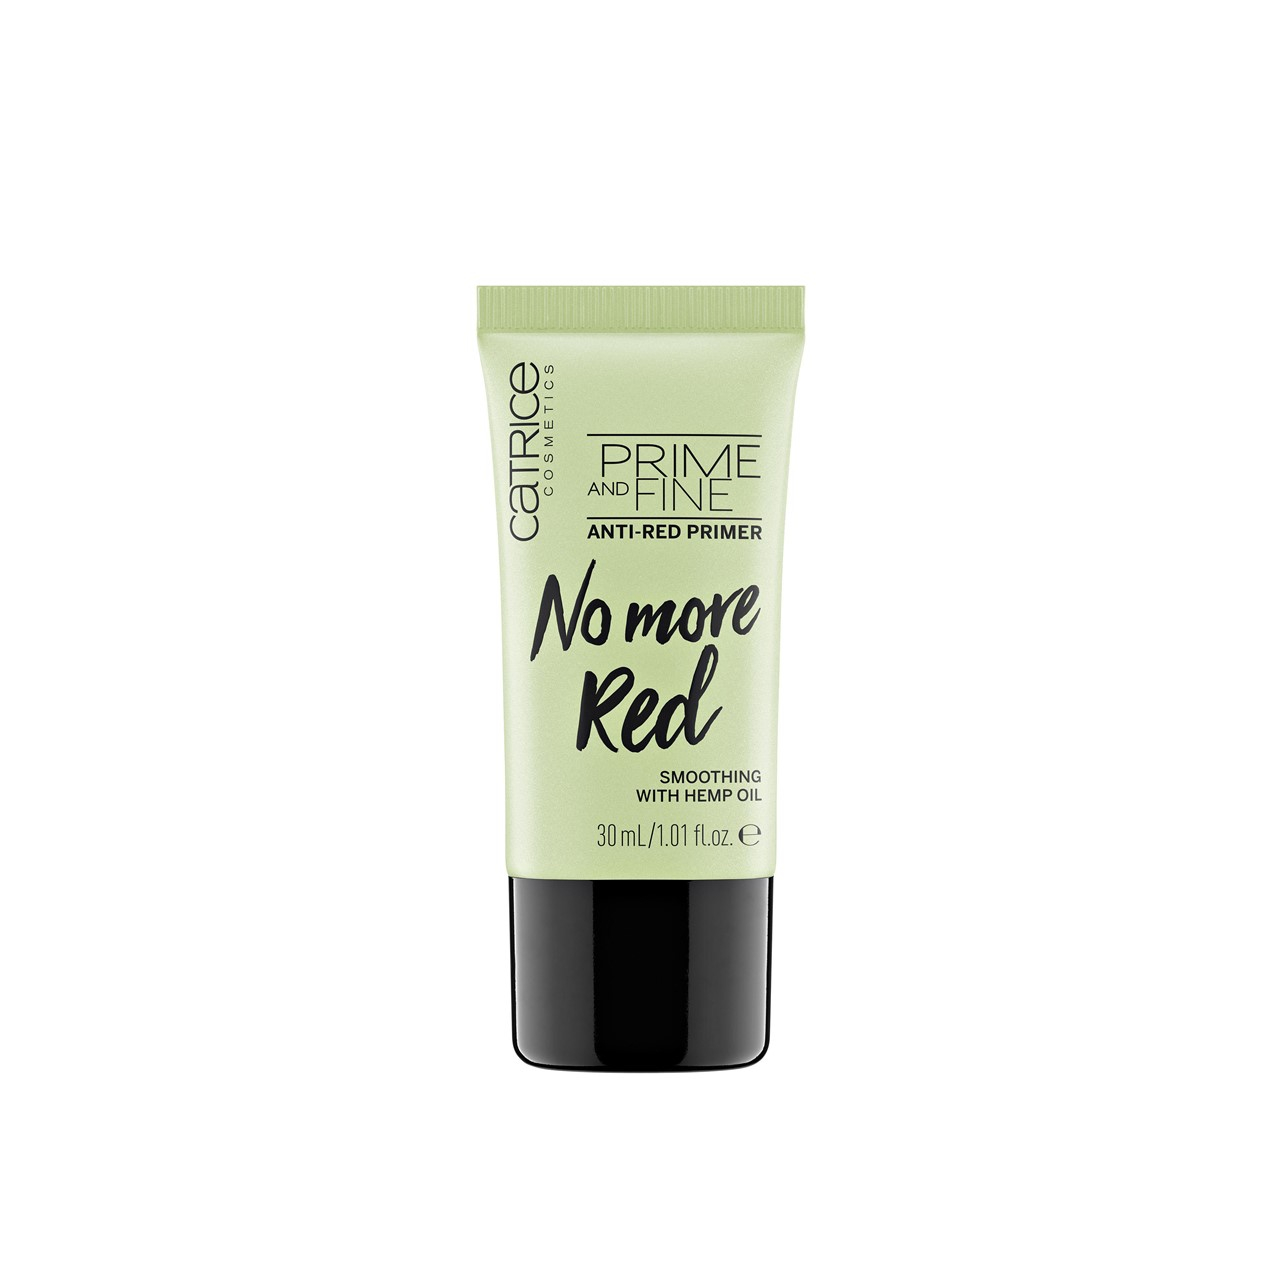 Buy Catrice Prime And Fine Anti-Red Primer No More Red 30ml · Greenland